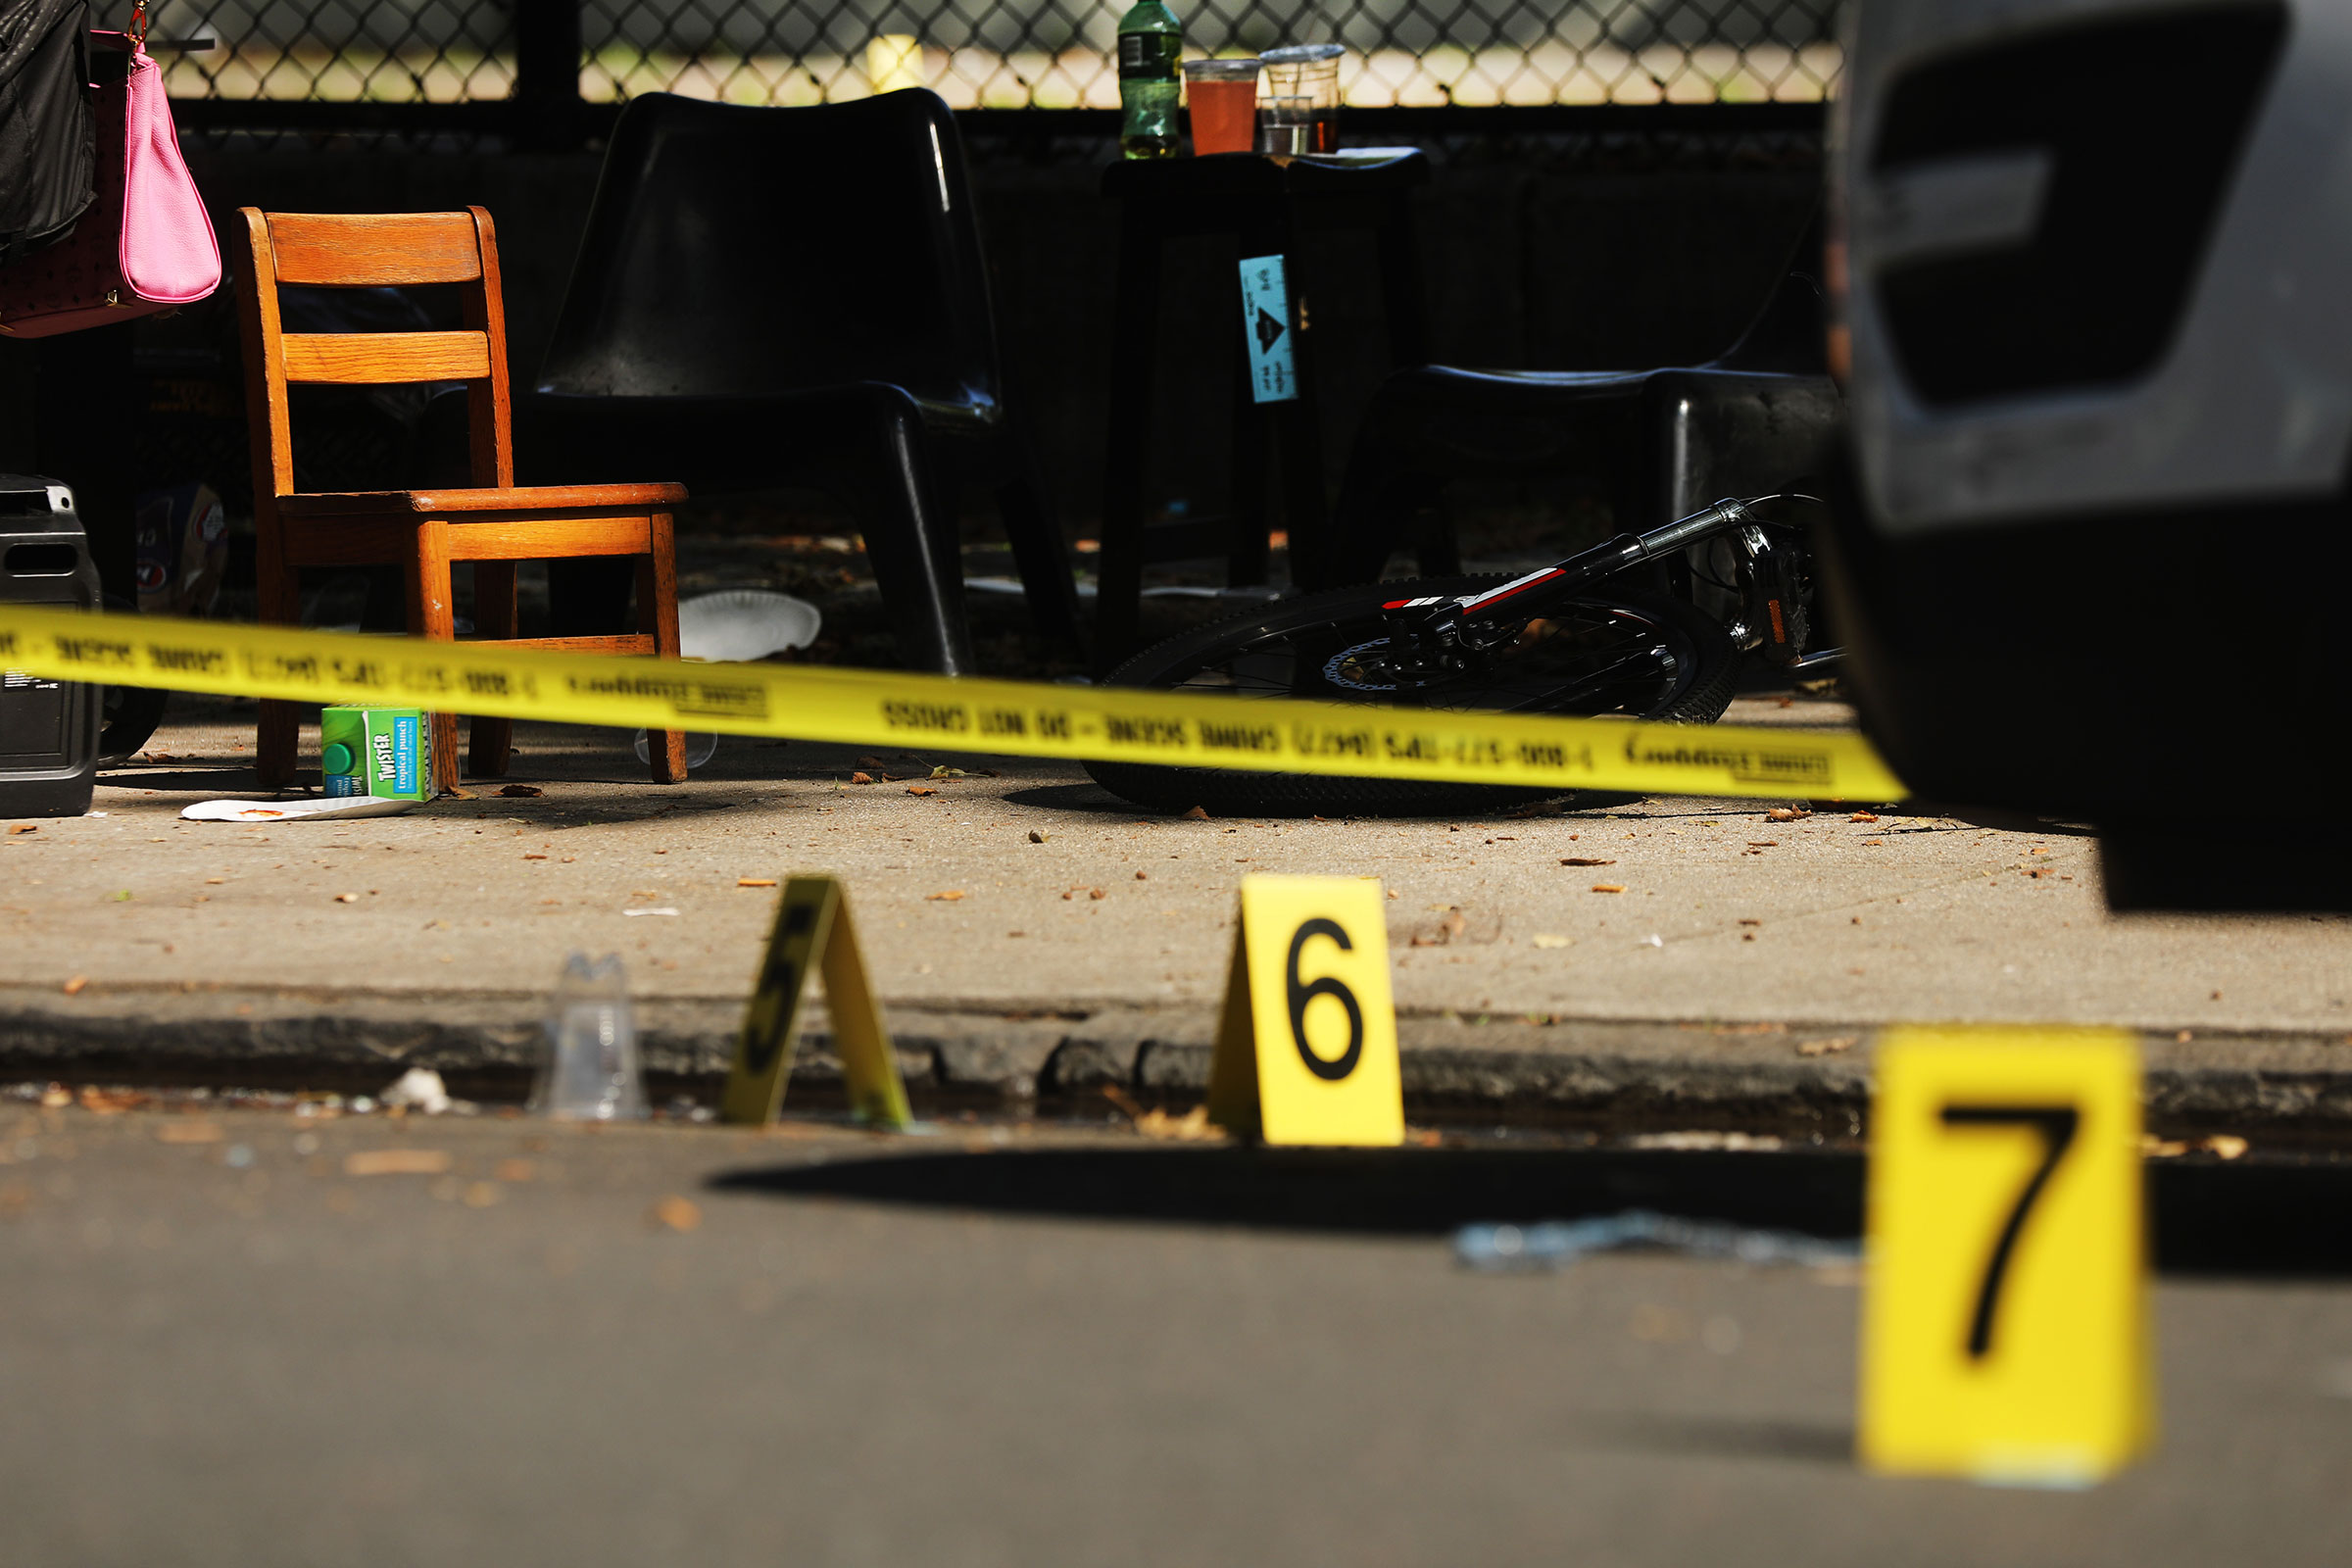 Police ballistic markers stand beside a child's chair and bicycle at a crime scene in Brooklyn where a one year old child was shot and killed on July 13, 2020 in New York City. The 1-year-old boy was shot near a playground during a Sunday picnic when gunfire erupted. (Spencer Platt—Getty Images)